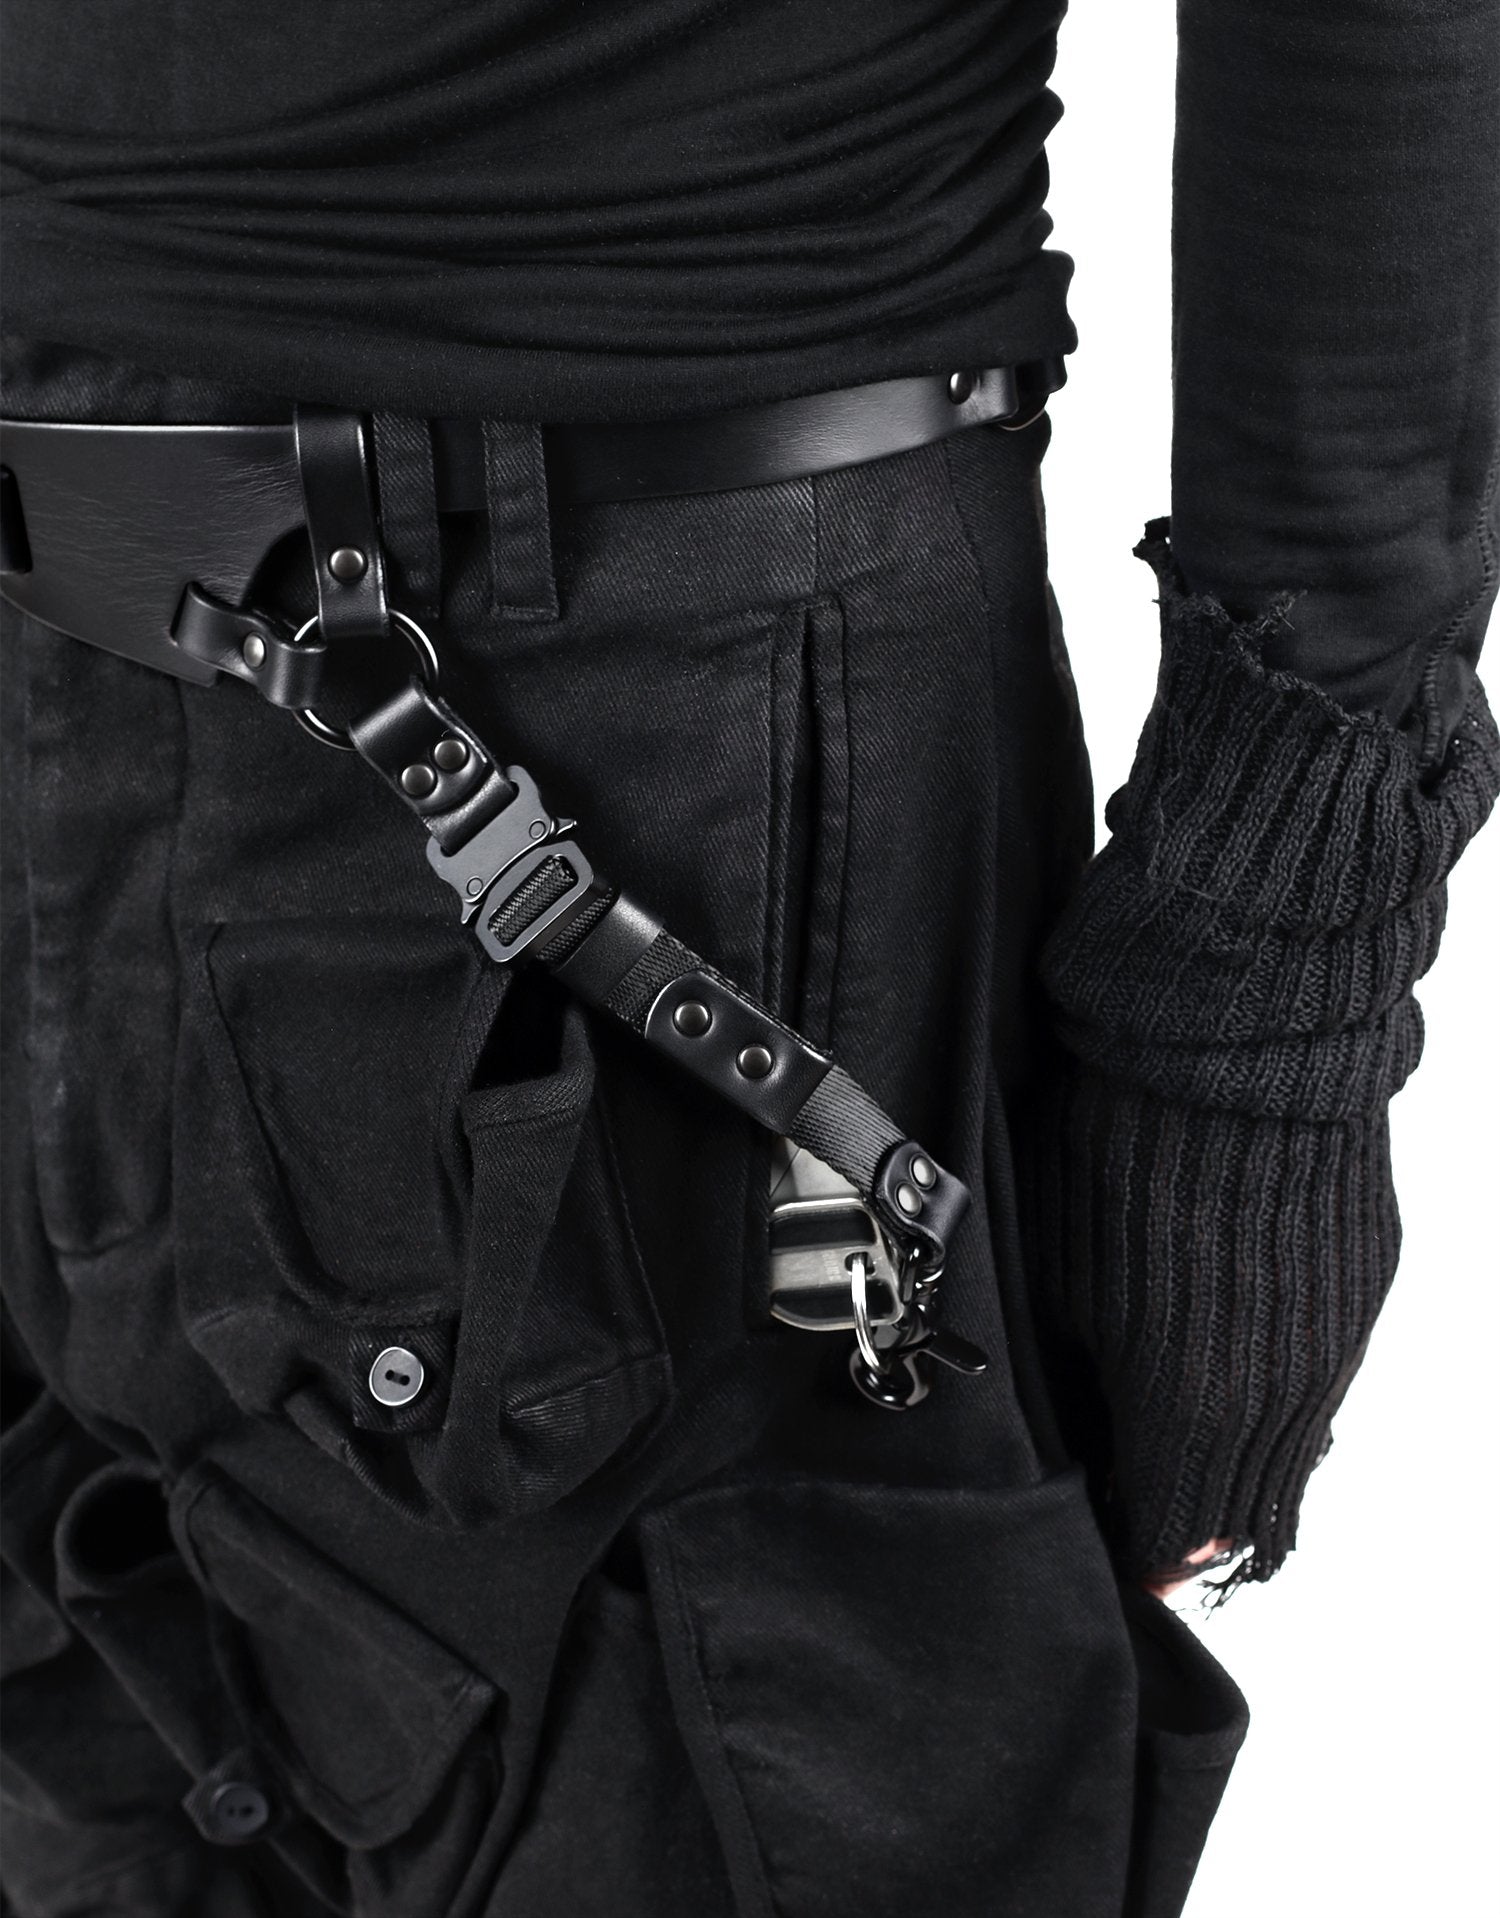 A3TEPHRA 1023BLACKComplete your style with the perfect accessory. This adjustable belt with a sleek press-release buckle and durable nylon webbing is the finishing touch you need. HanAccessori UnisexLA HAINE INSIDE USTEPHRAA3TEPHRA 1023BLACK